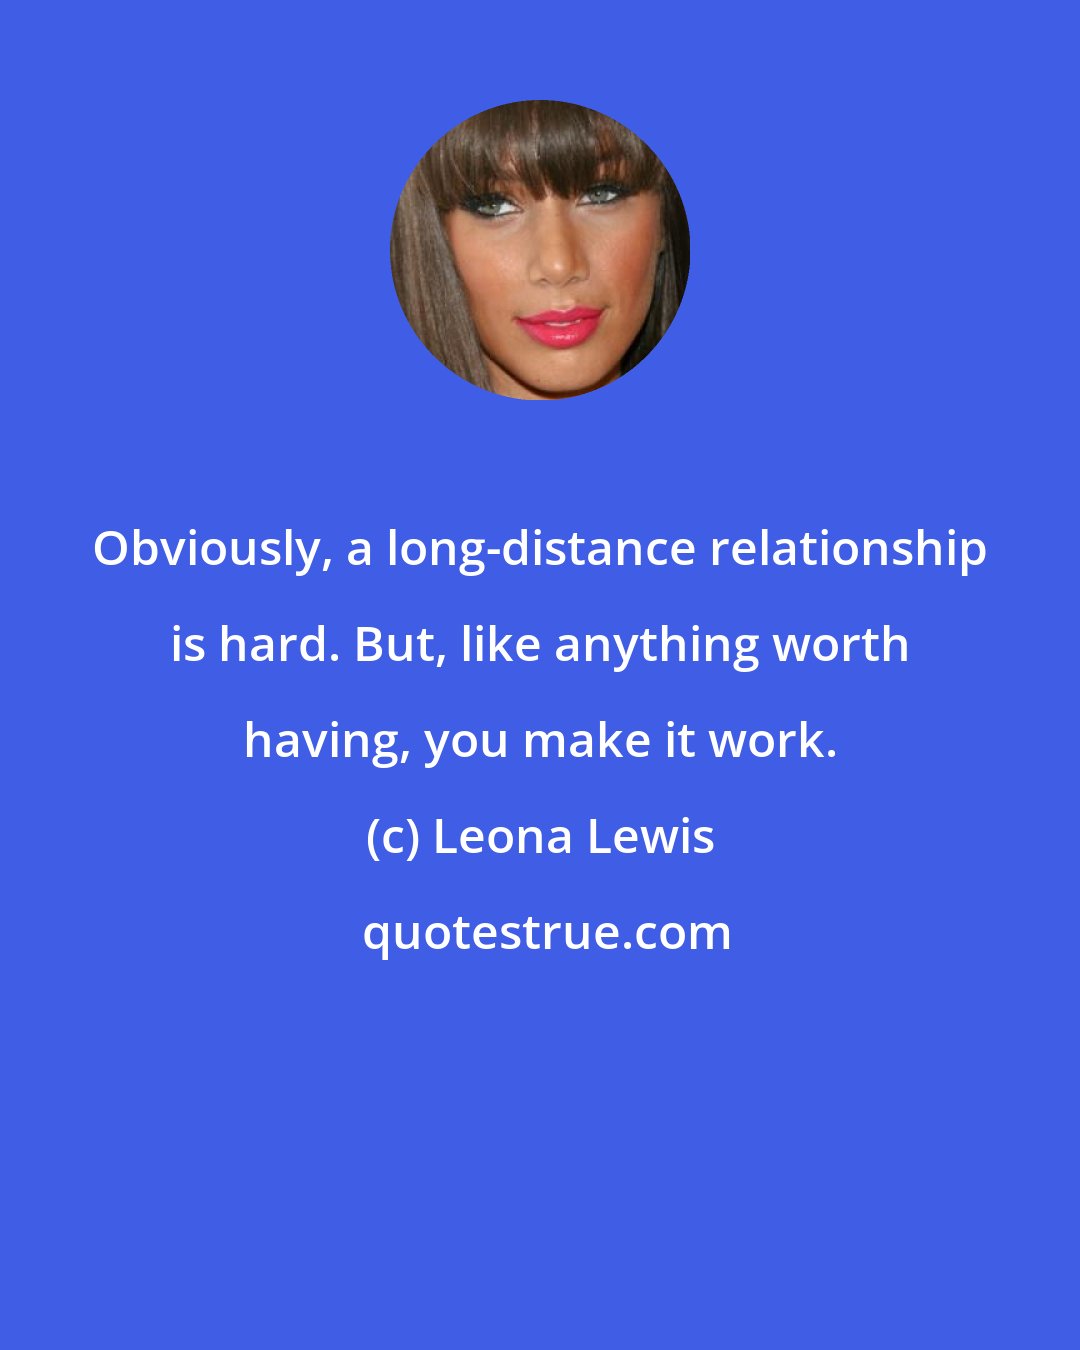 Leona Lewis: Obviously, a long-distance relationship is hard. But, like anything worth having, you make it work.